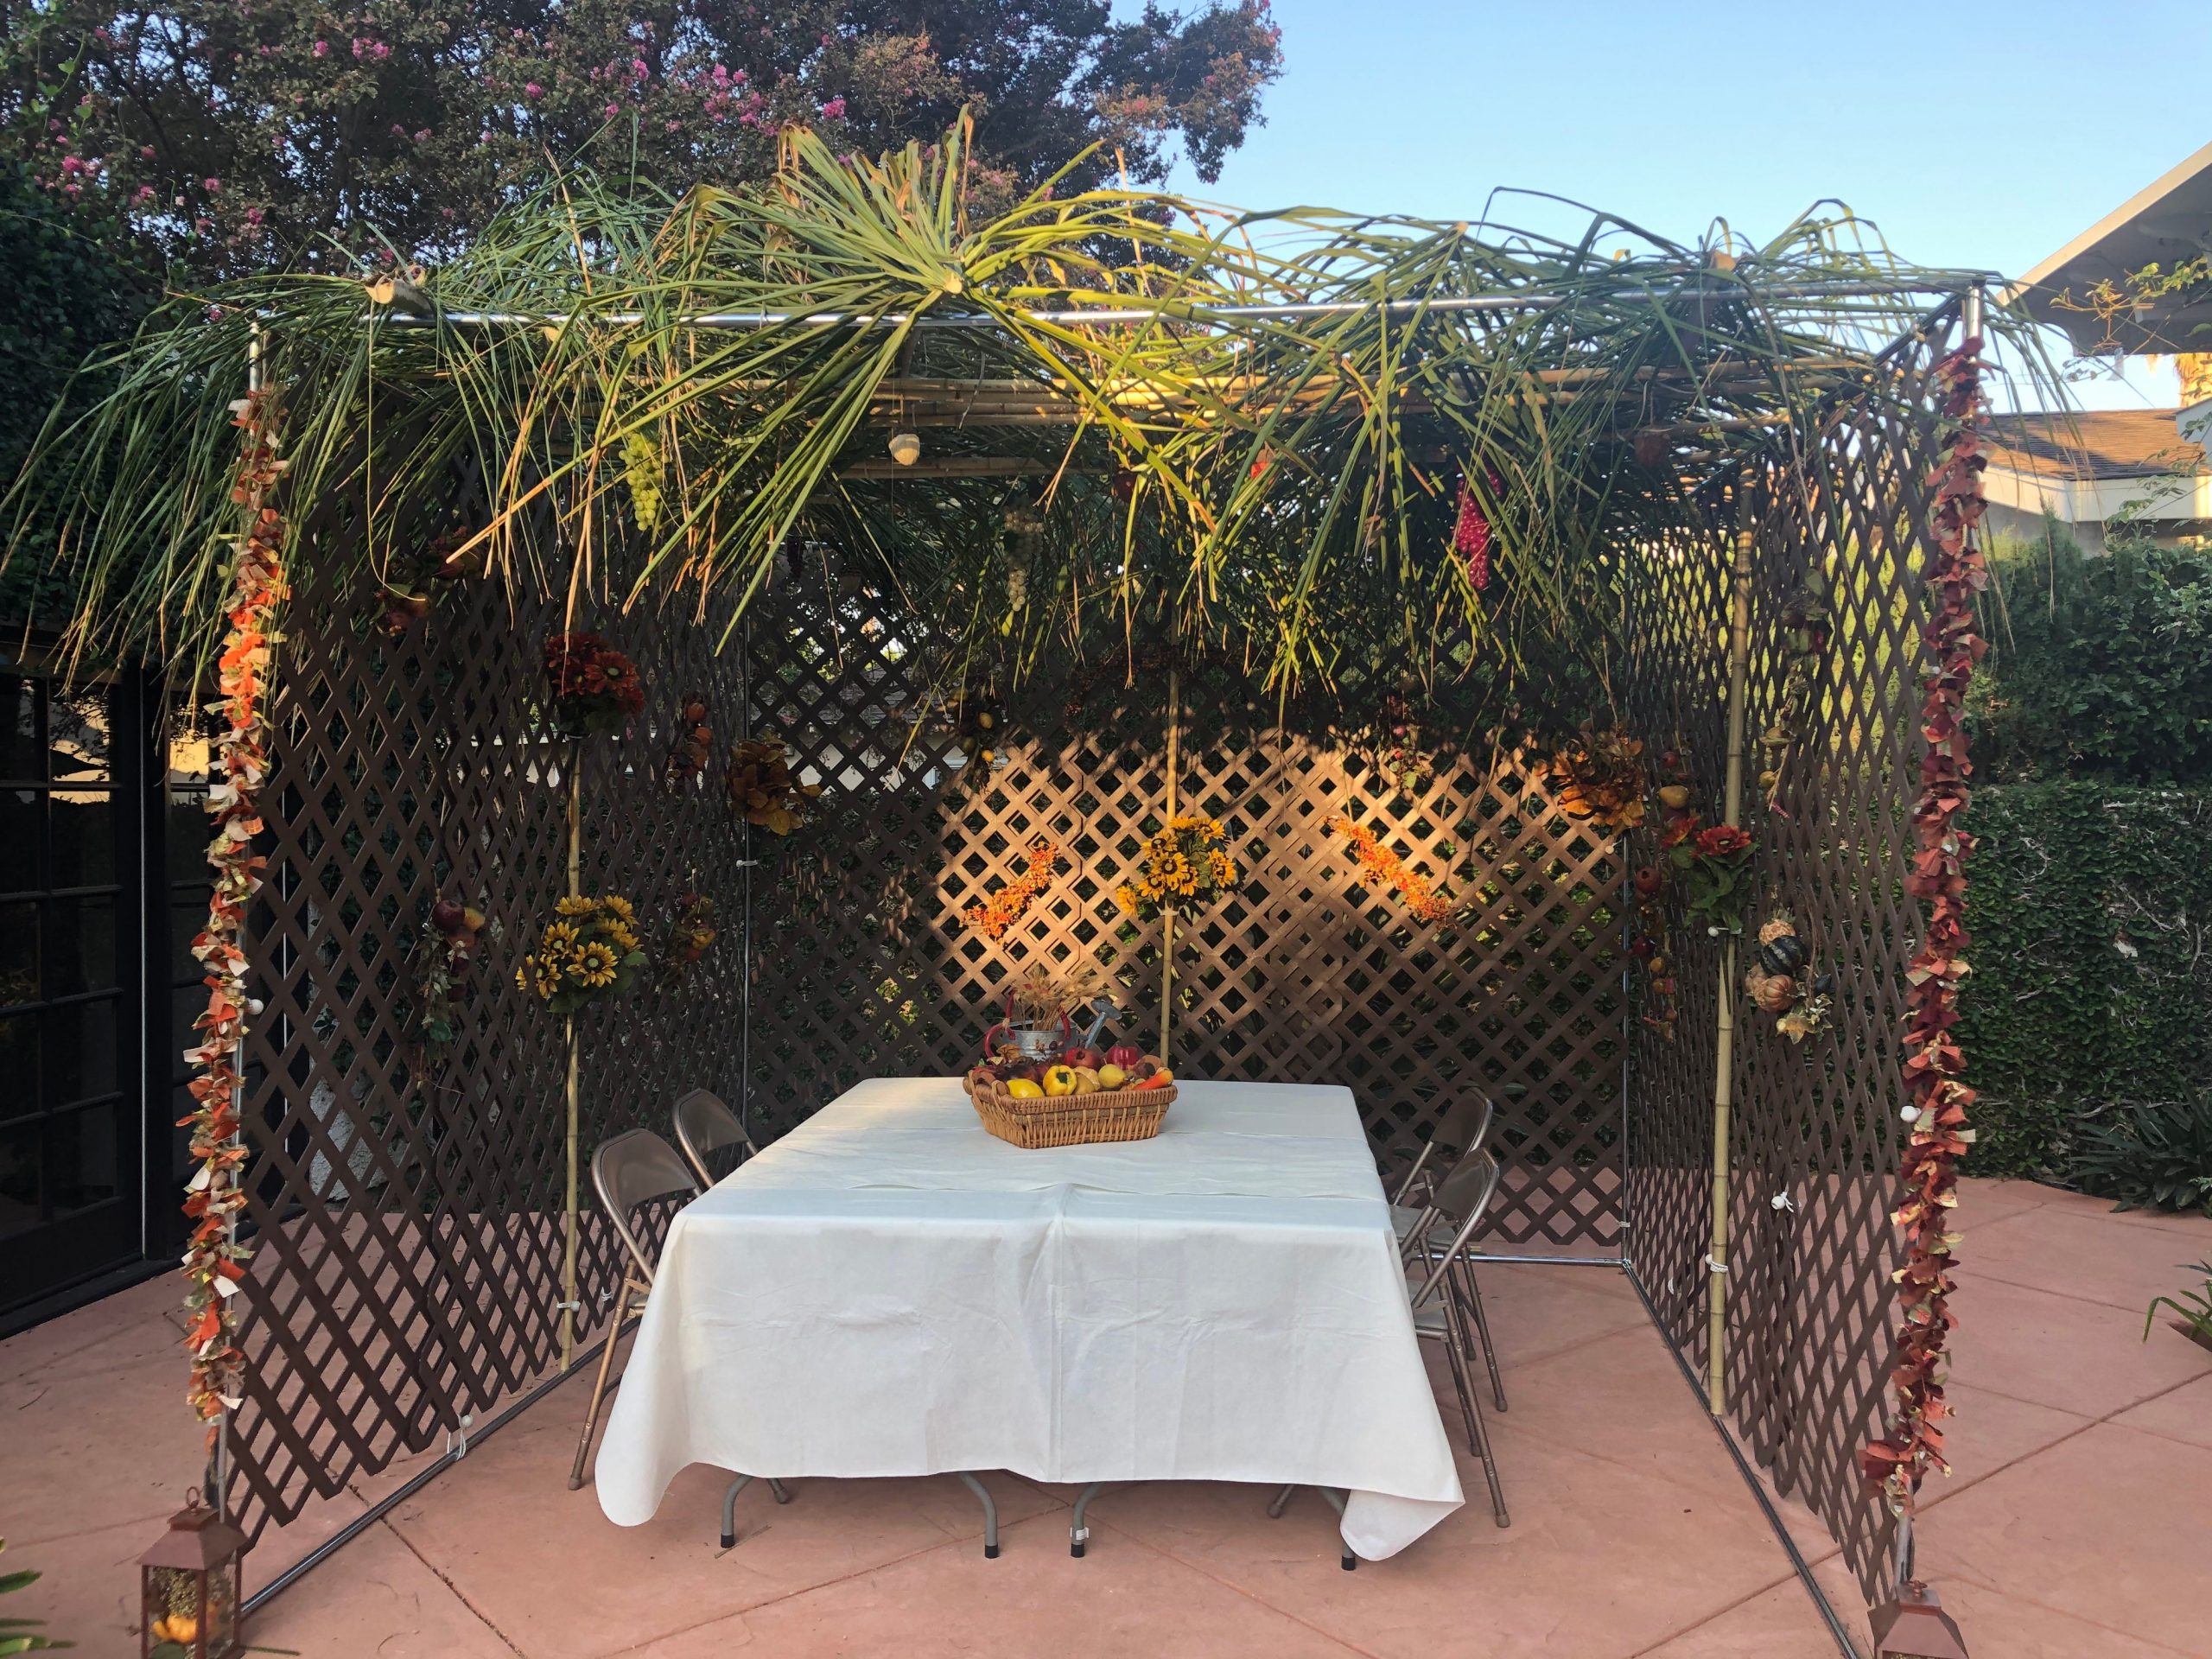 “Feast of the Booths” Sukkot in Venice, Florida